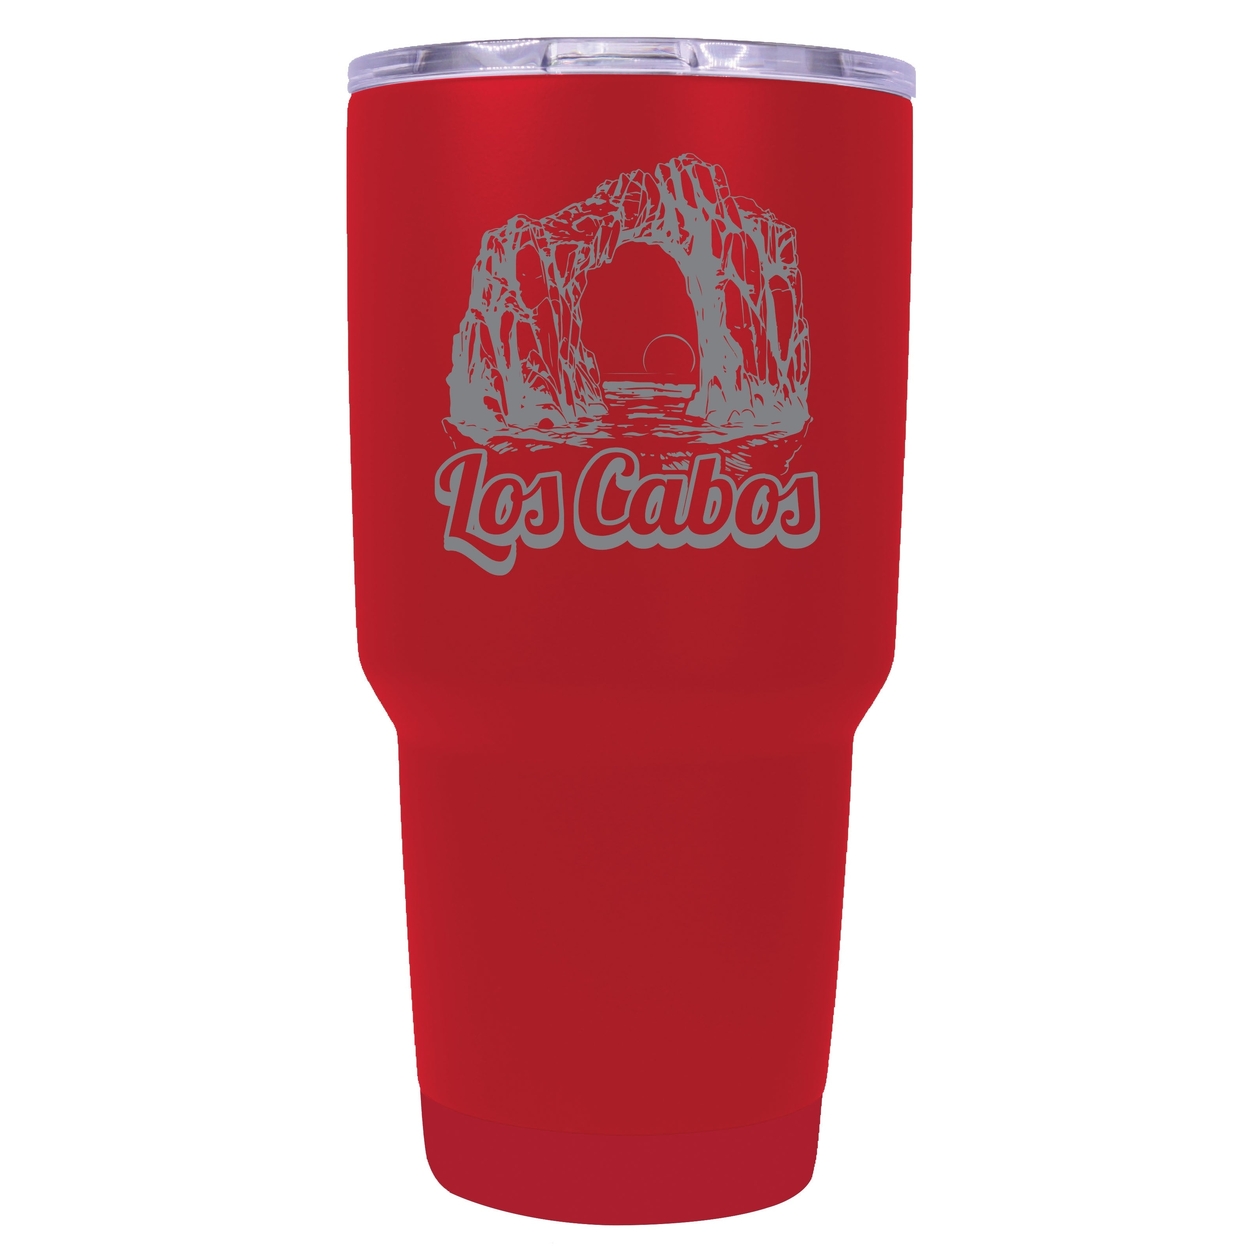 Los Cabos Mexico Souvenir 24 Oz Engraved Insulated Stainless Steel Tumbler - Red,,2-Pack